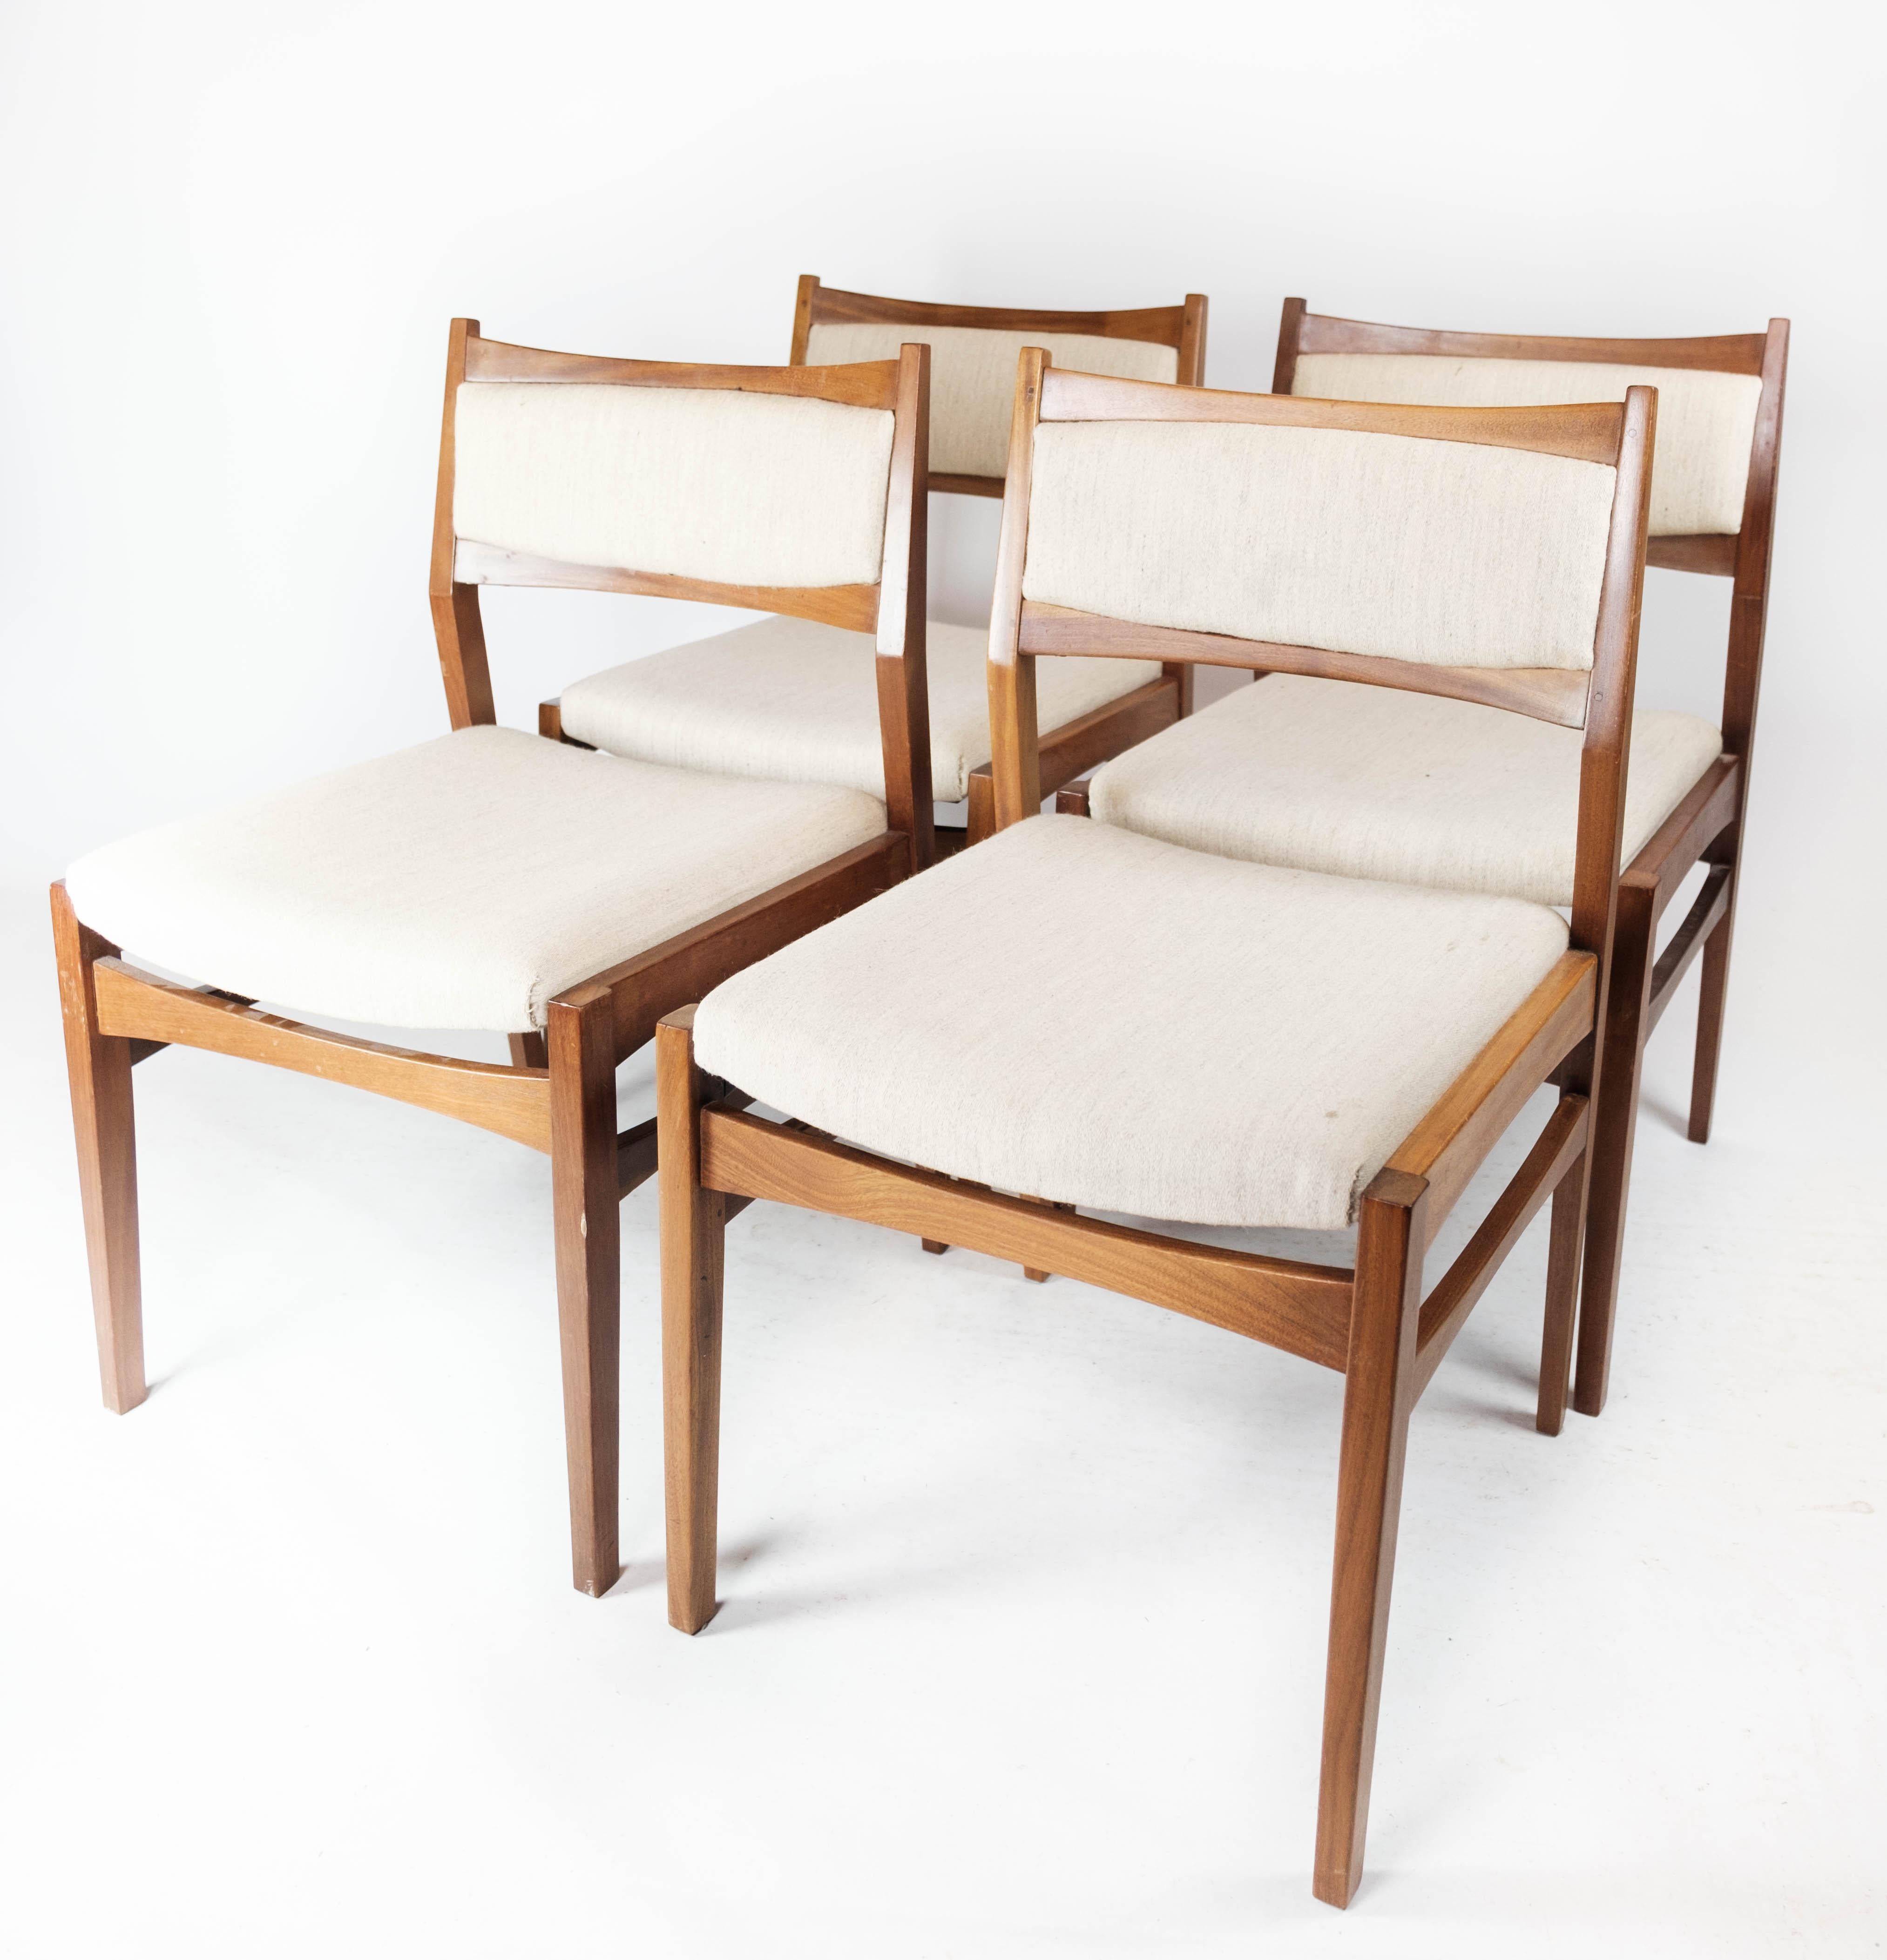 Fabric Set of Four Dining Room Chairs in Teak of Danish Design, 1960s